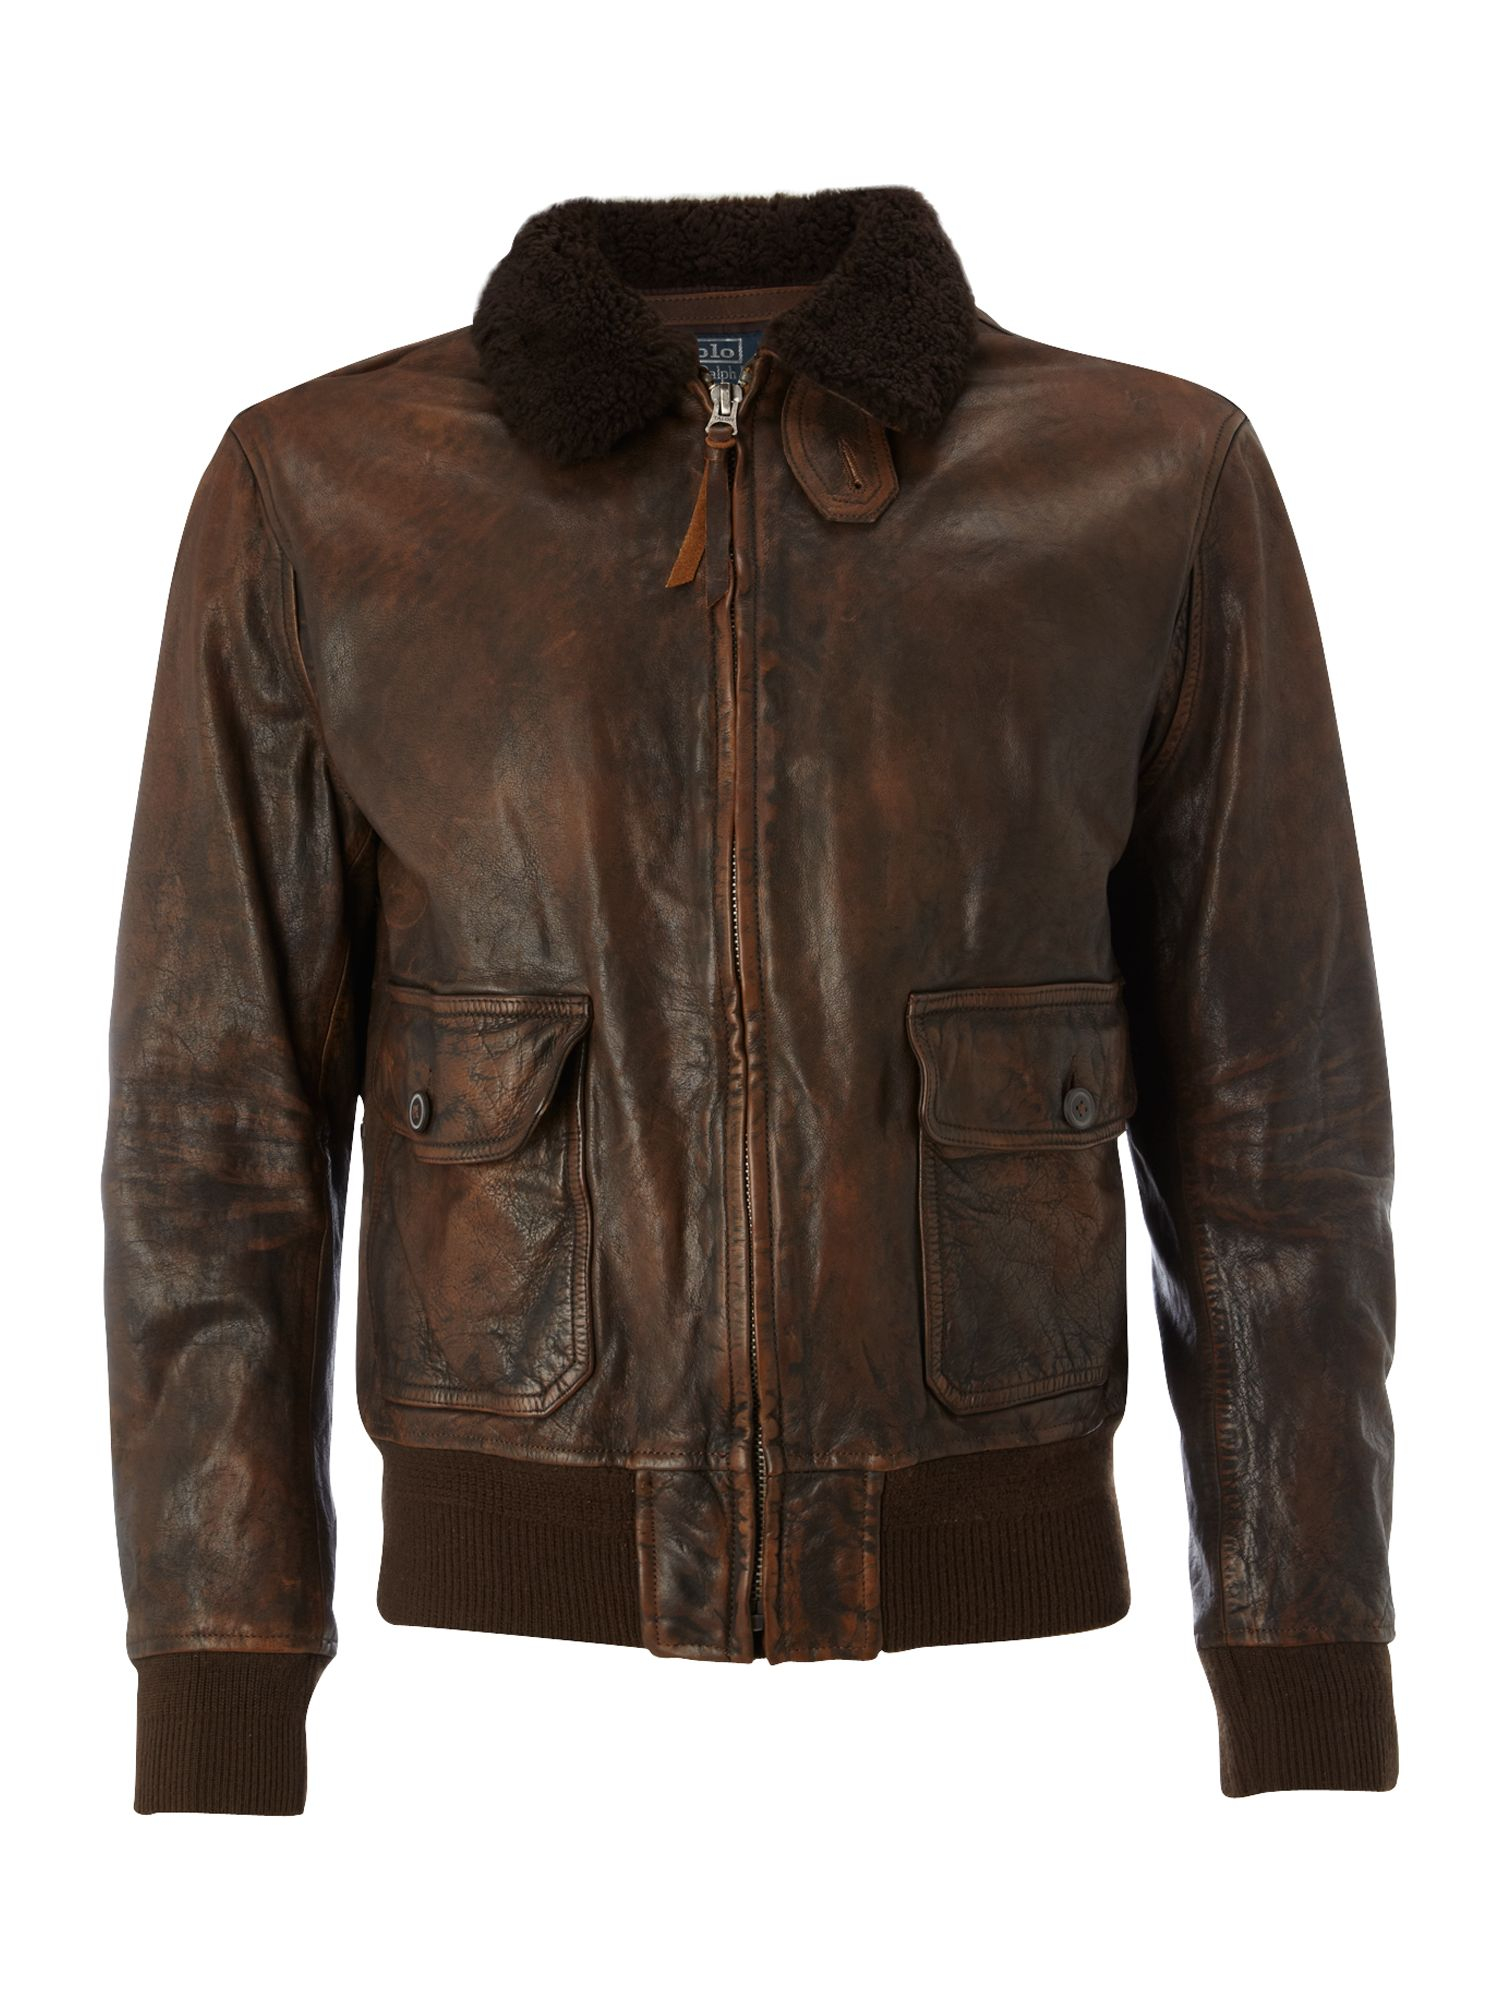 Polo Ralph Lauren Vintage Leather Jacket in Brown for Men | Lyst